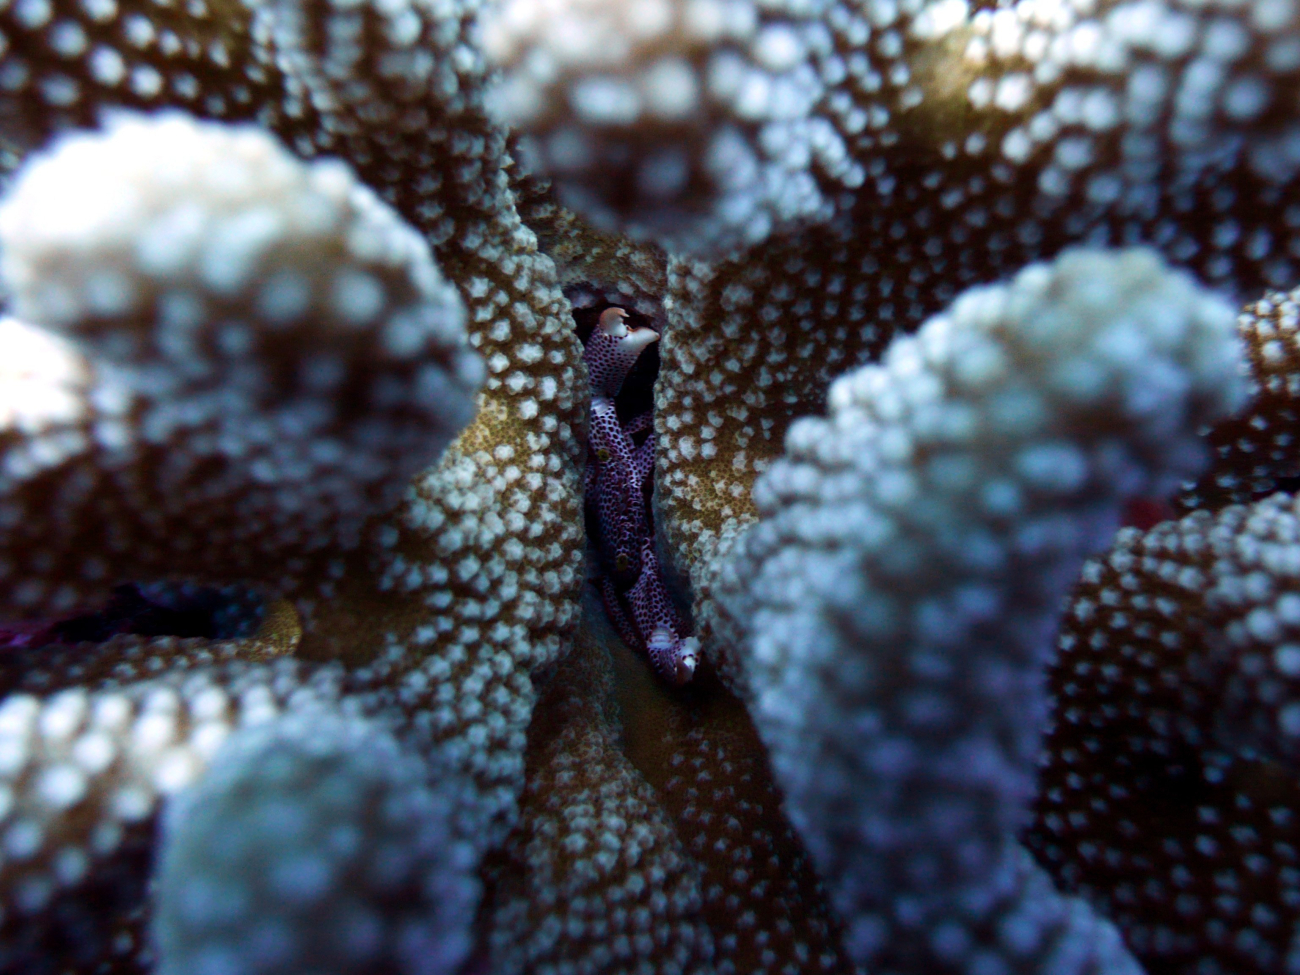 A small purple dotted crab wedged between coral appendages